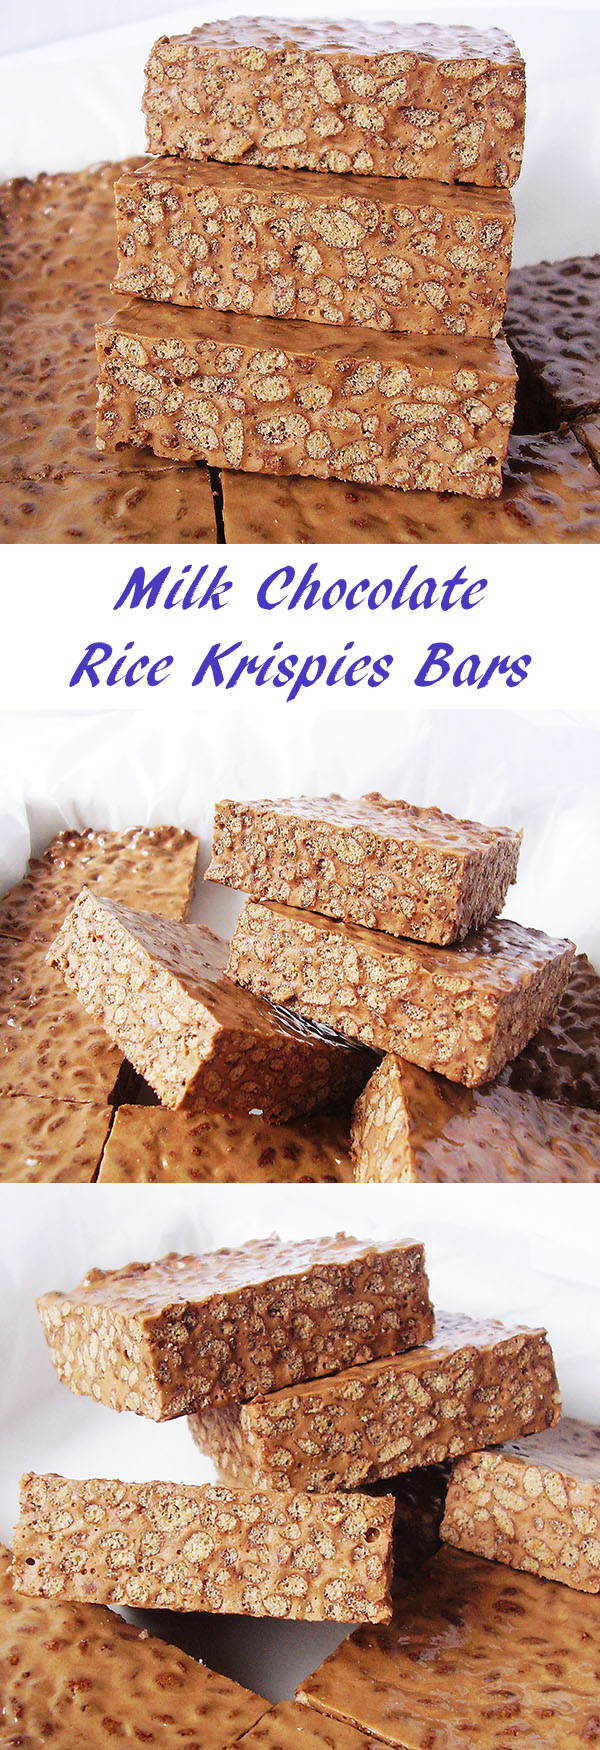 Milk Chocolate Rice Krispies Bars are delicious crispy treats with milk chocolate. No baking chocolate rice krispies loaded with marshmallows are kid friendly cereal dessert! Done under 30 minutes!